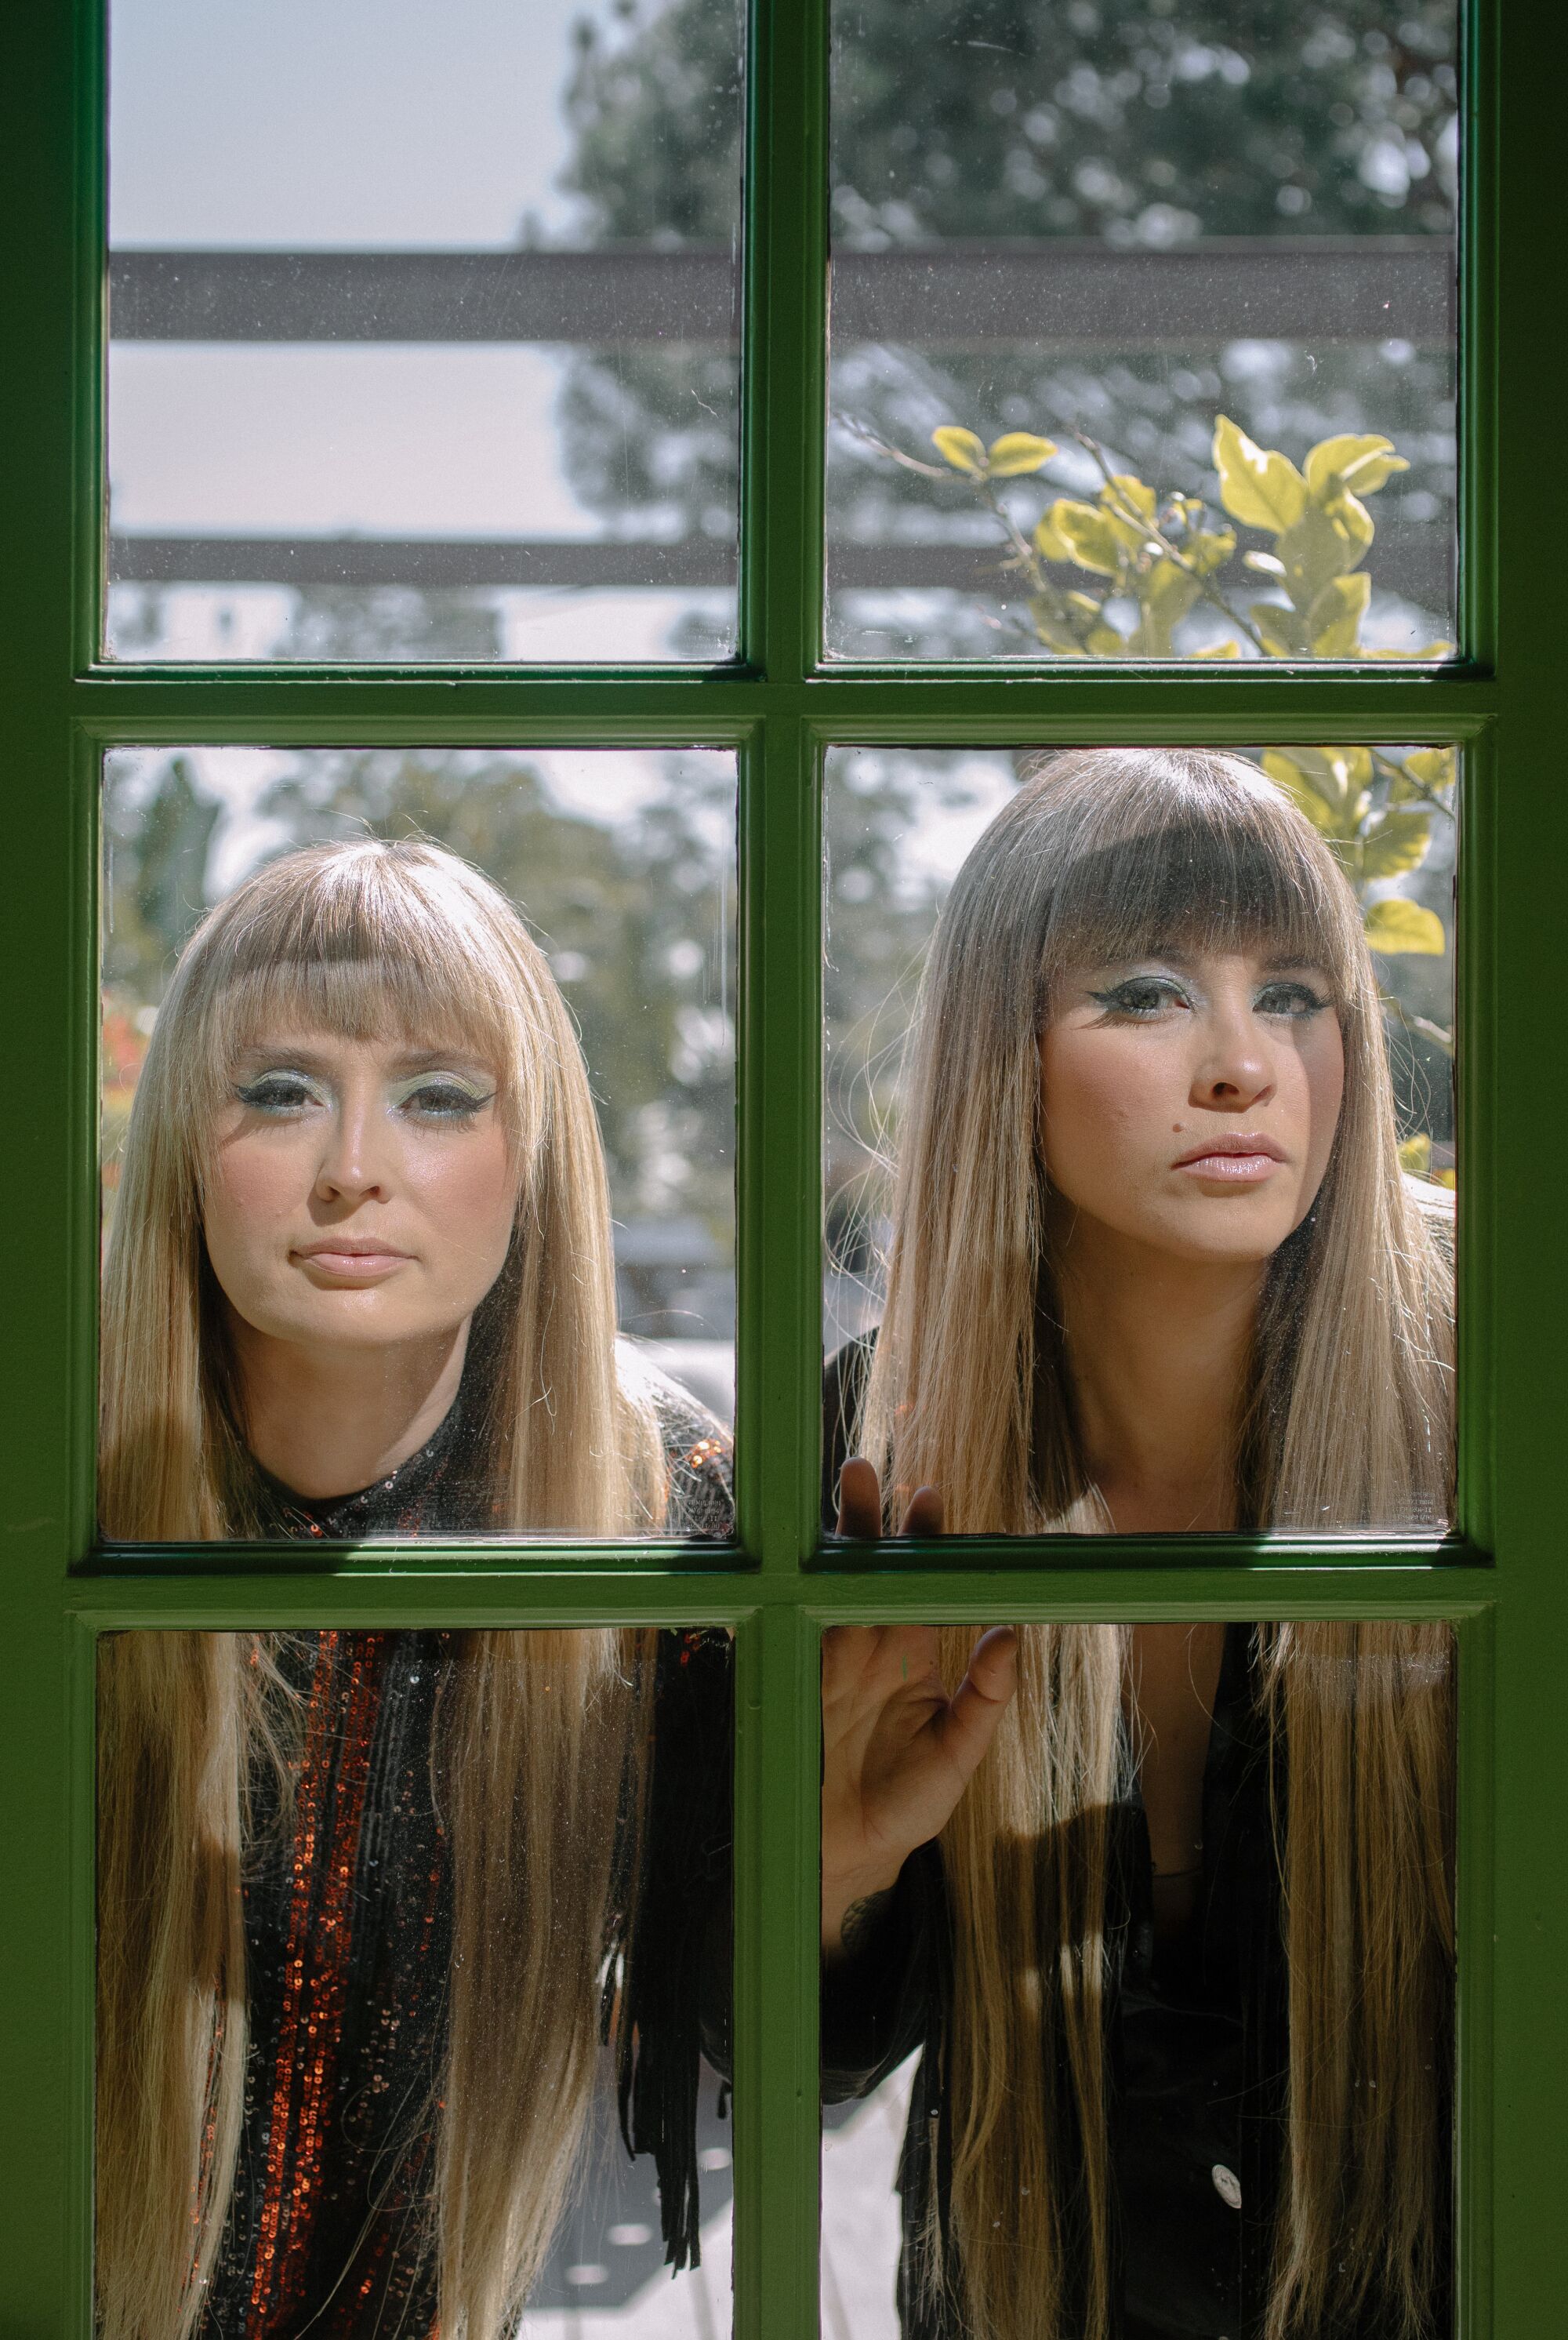 Two women with matching hair styles look through a window